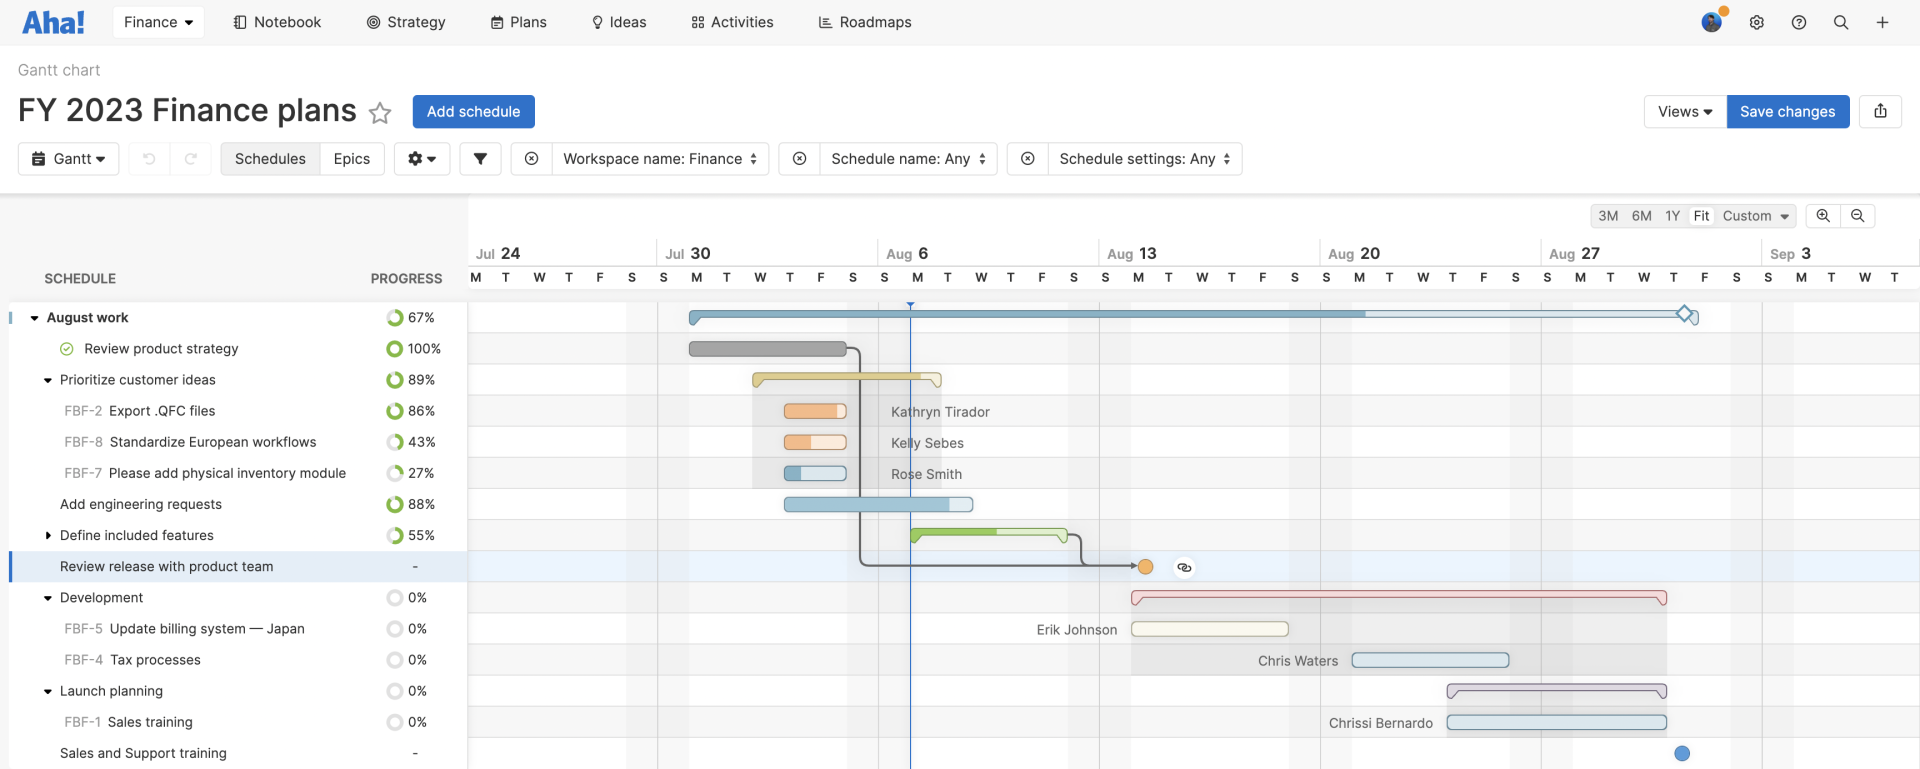 Aha! Roadmaps | Explore a business operations workspace in your account ...